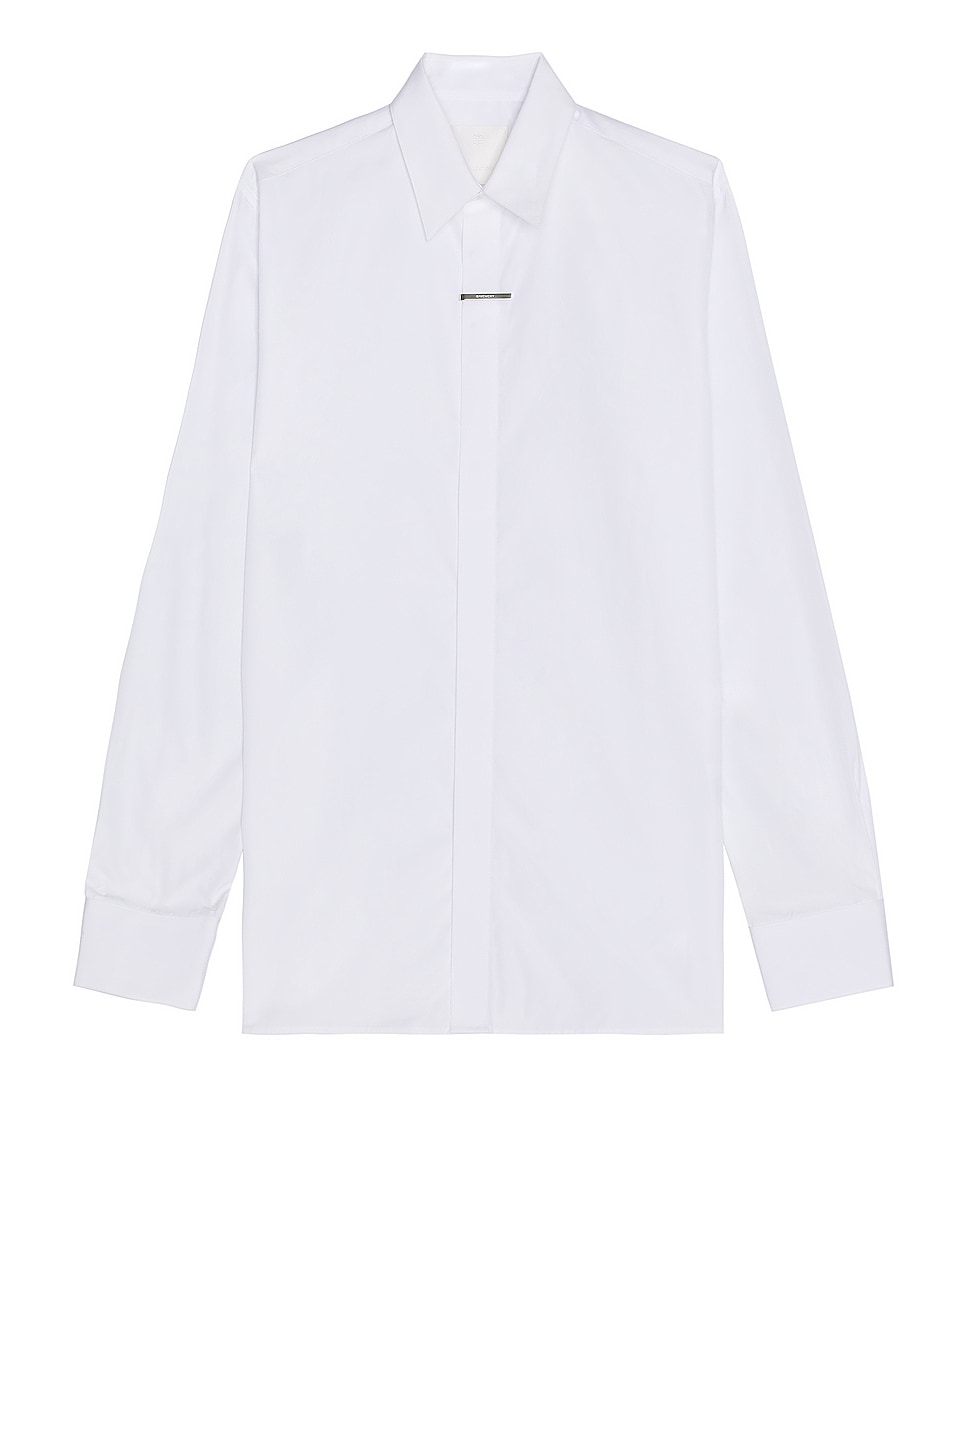 Image 1 of Givenchy Formal Metal Clip Shirt in White